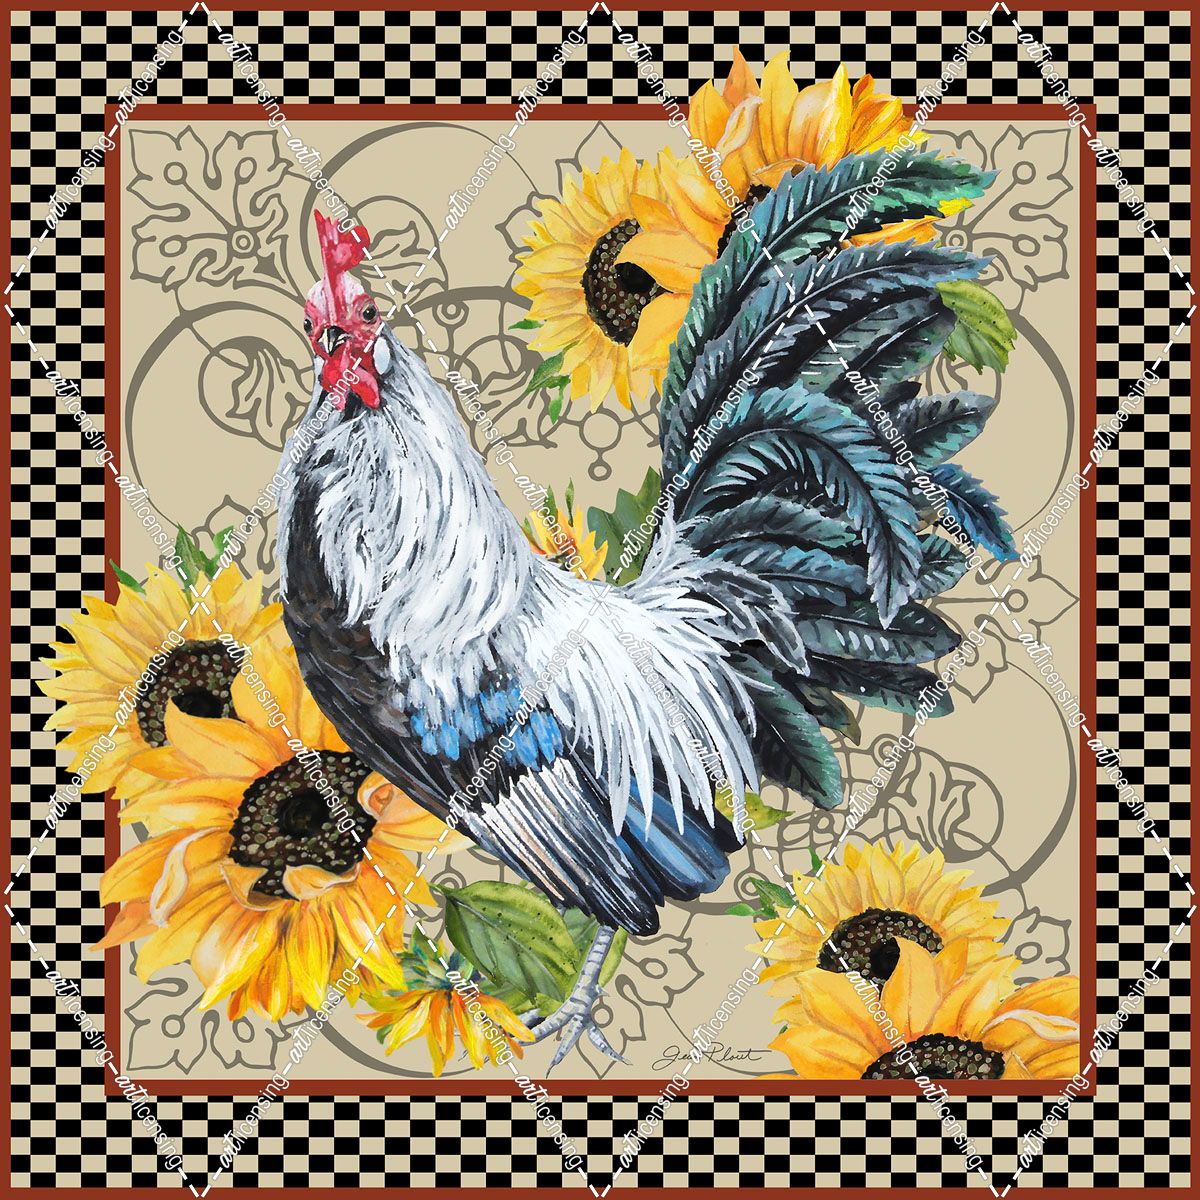 Country Time Rooster-C